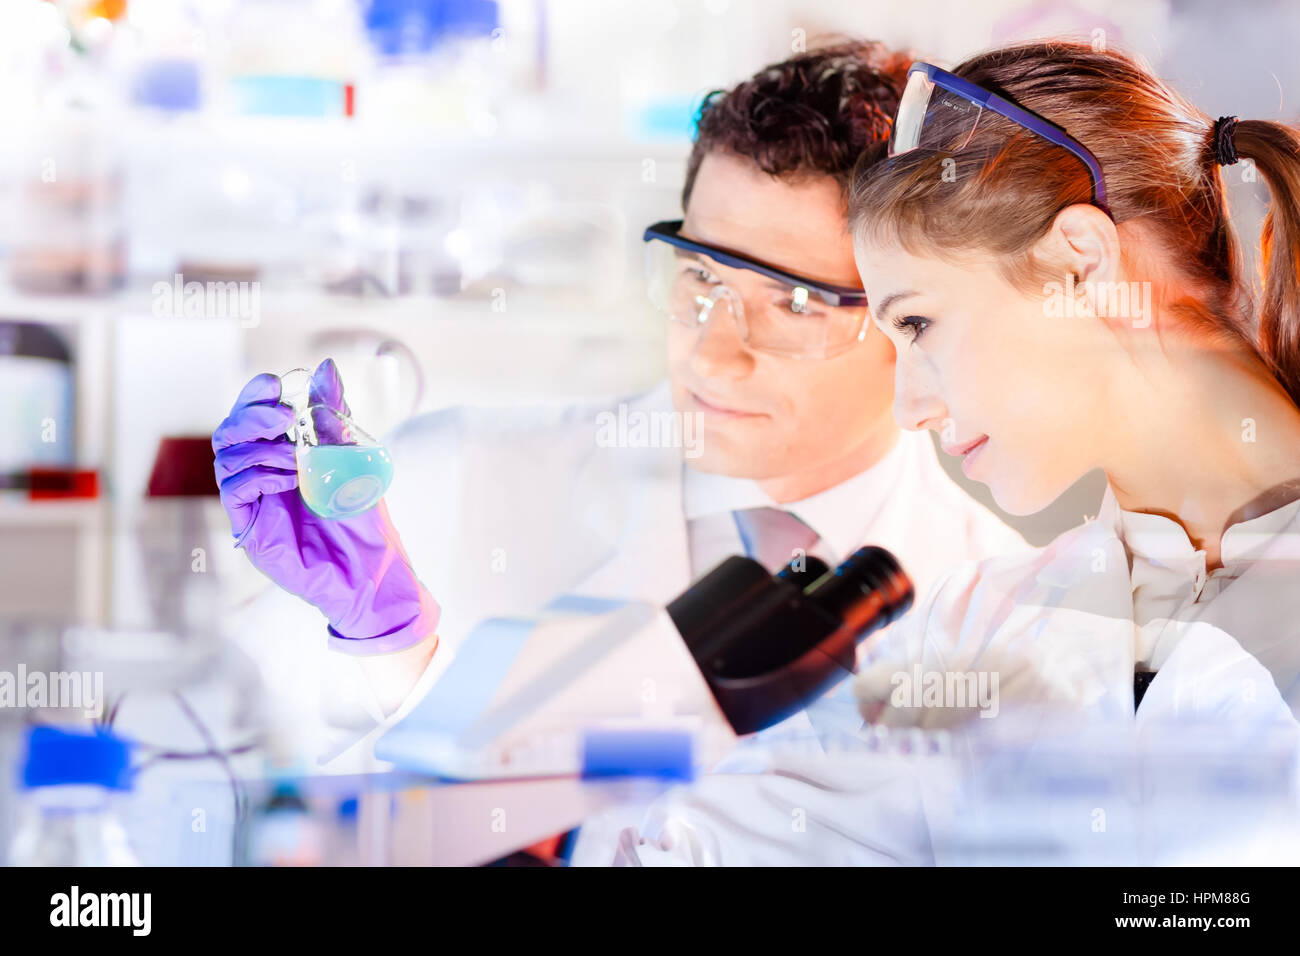 Life science researchers observing blue solution in laboratory. Stock Photo